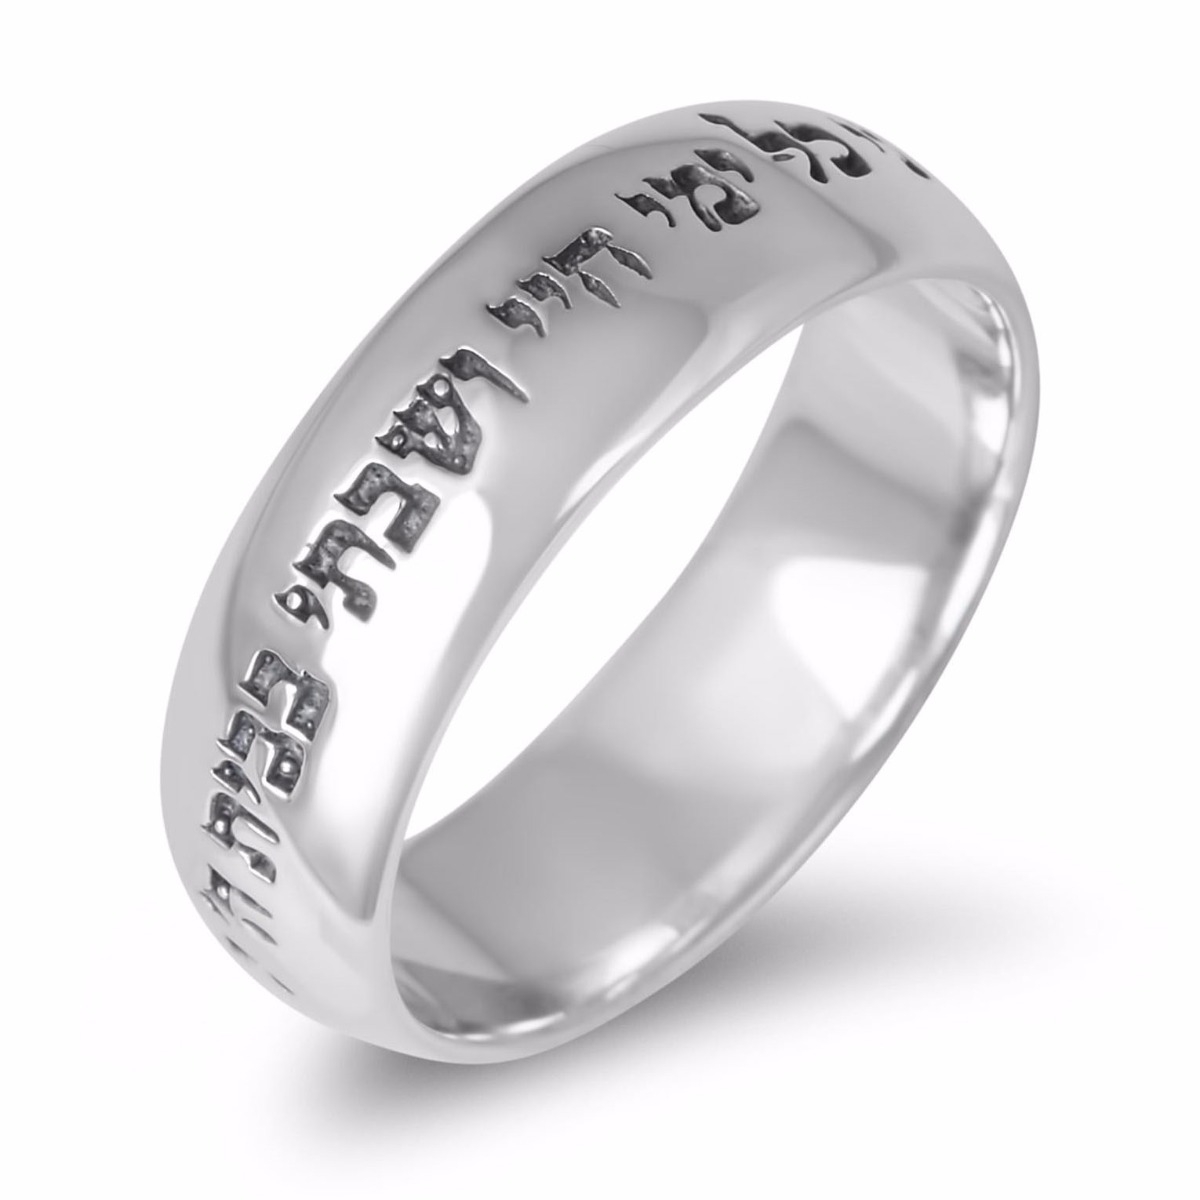 Engraved Sterling Silver Ring - Goodness and Kindness (Psalms 23:6) - 1